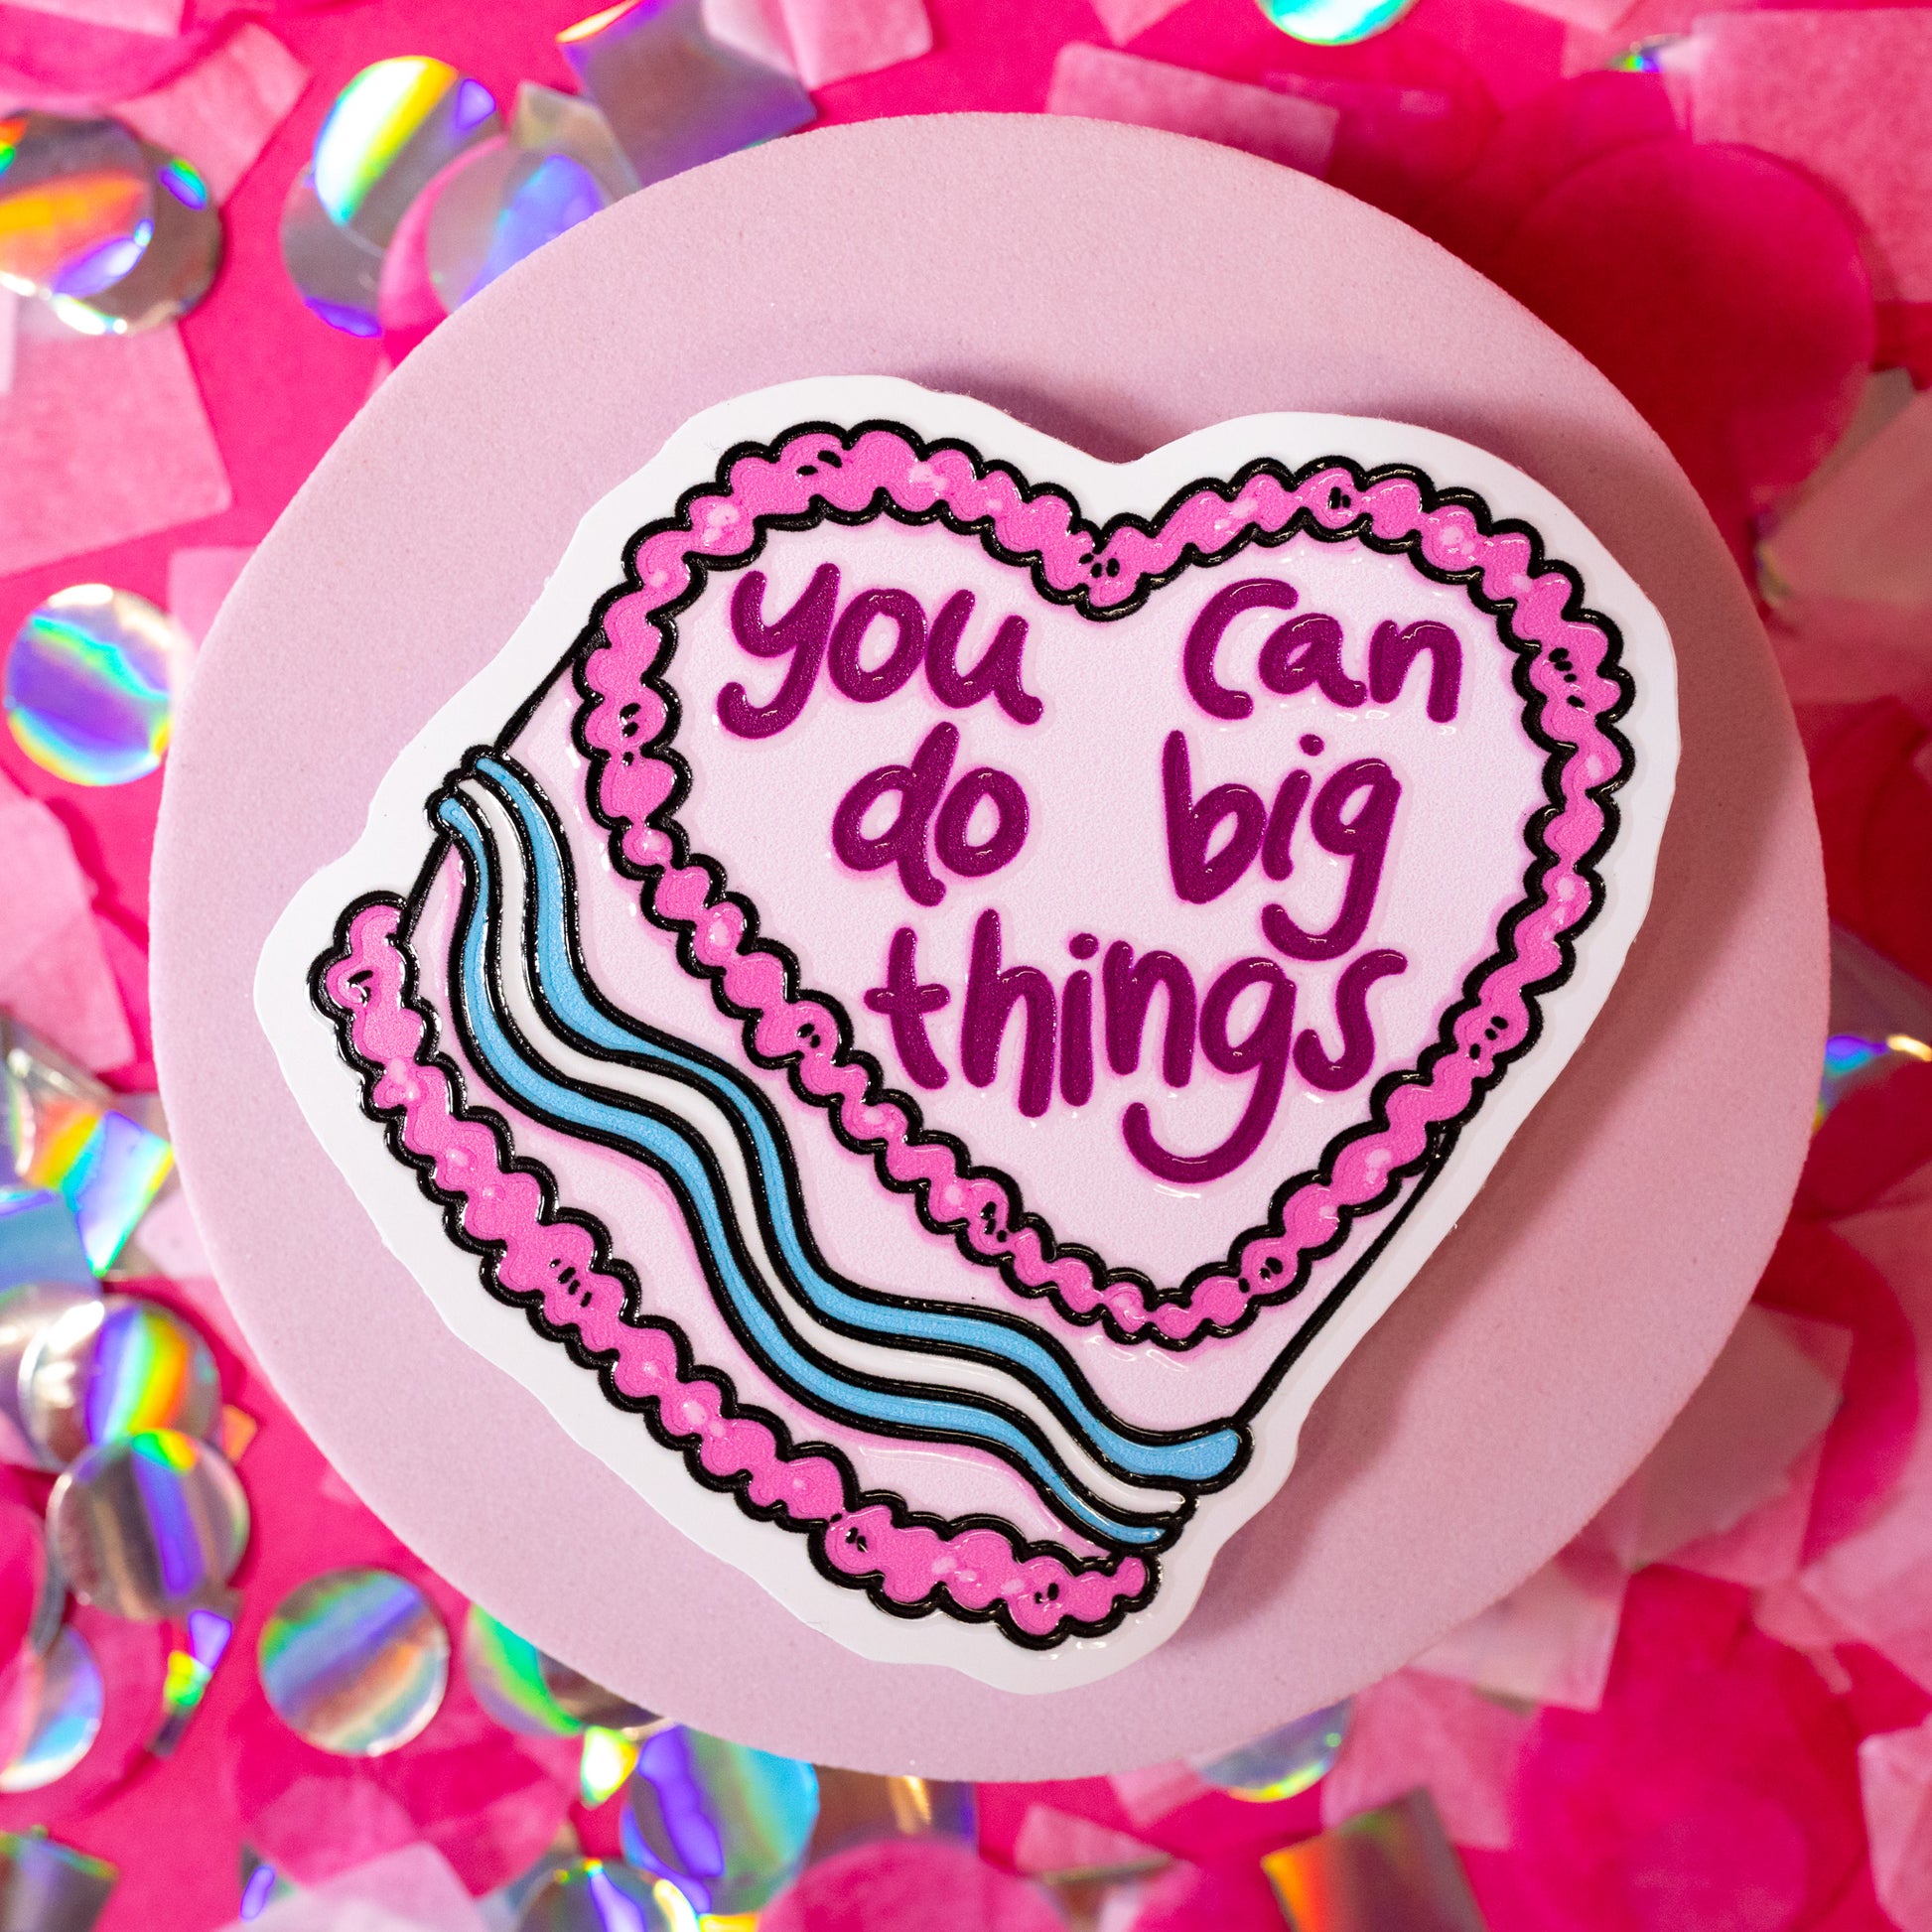 white cake sticker with pink words